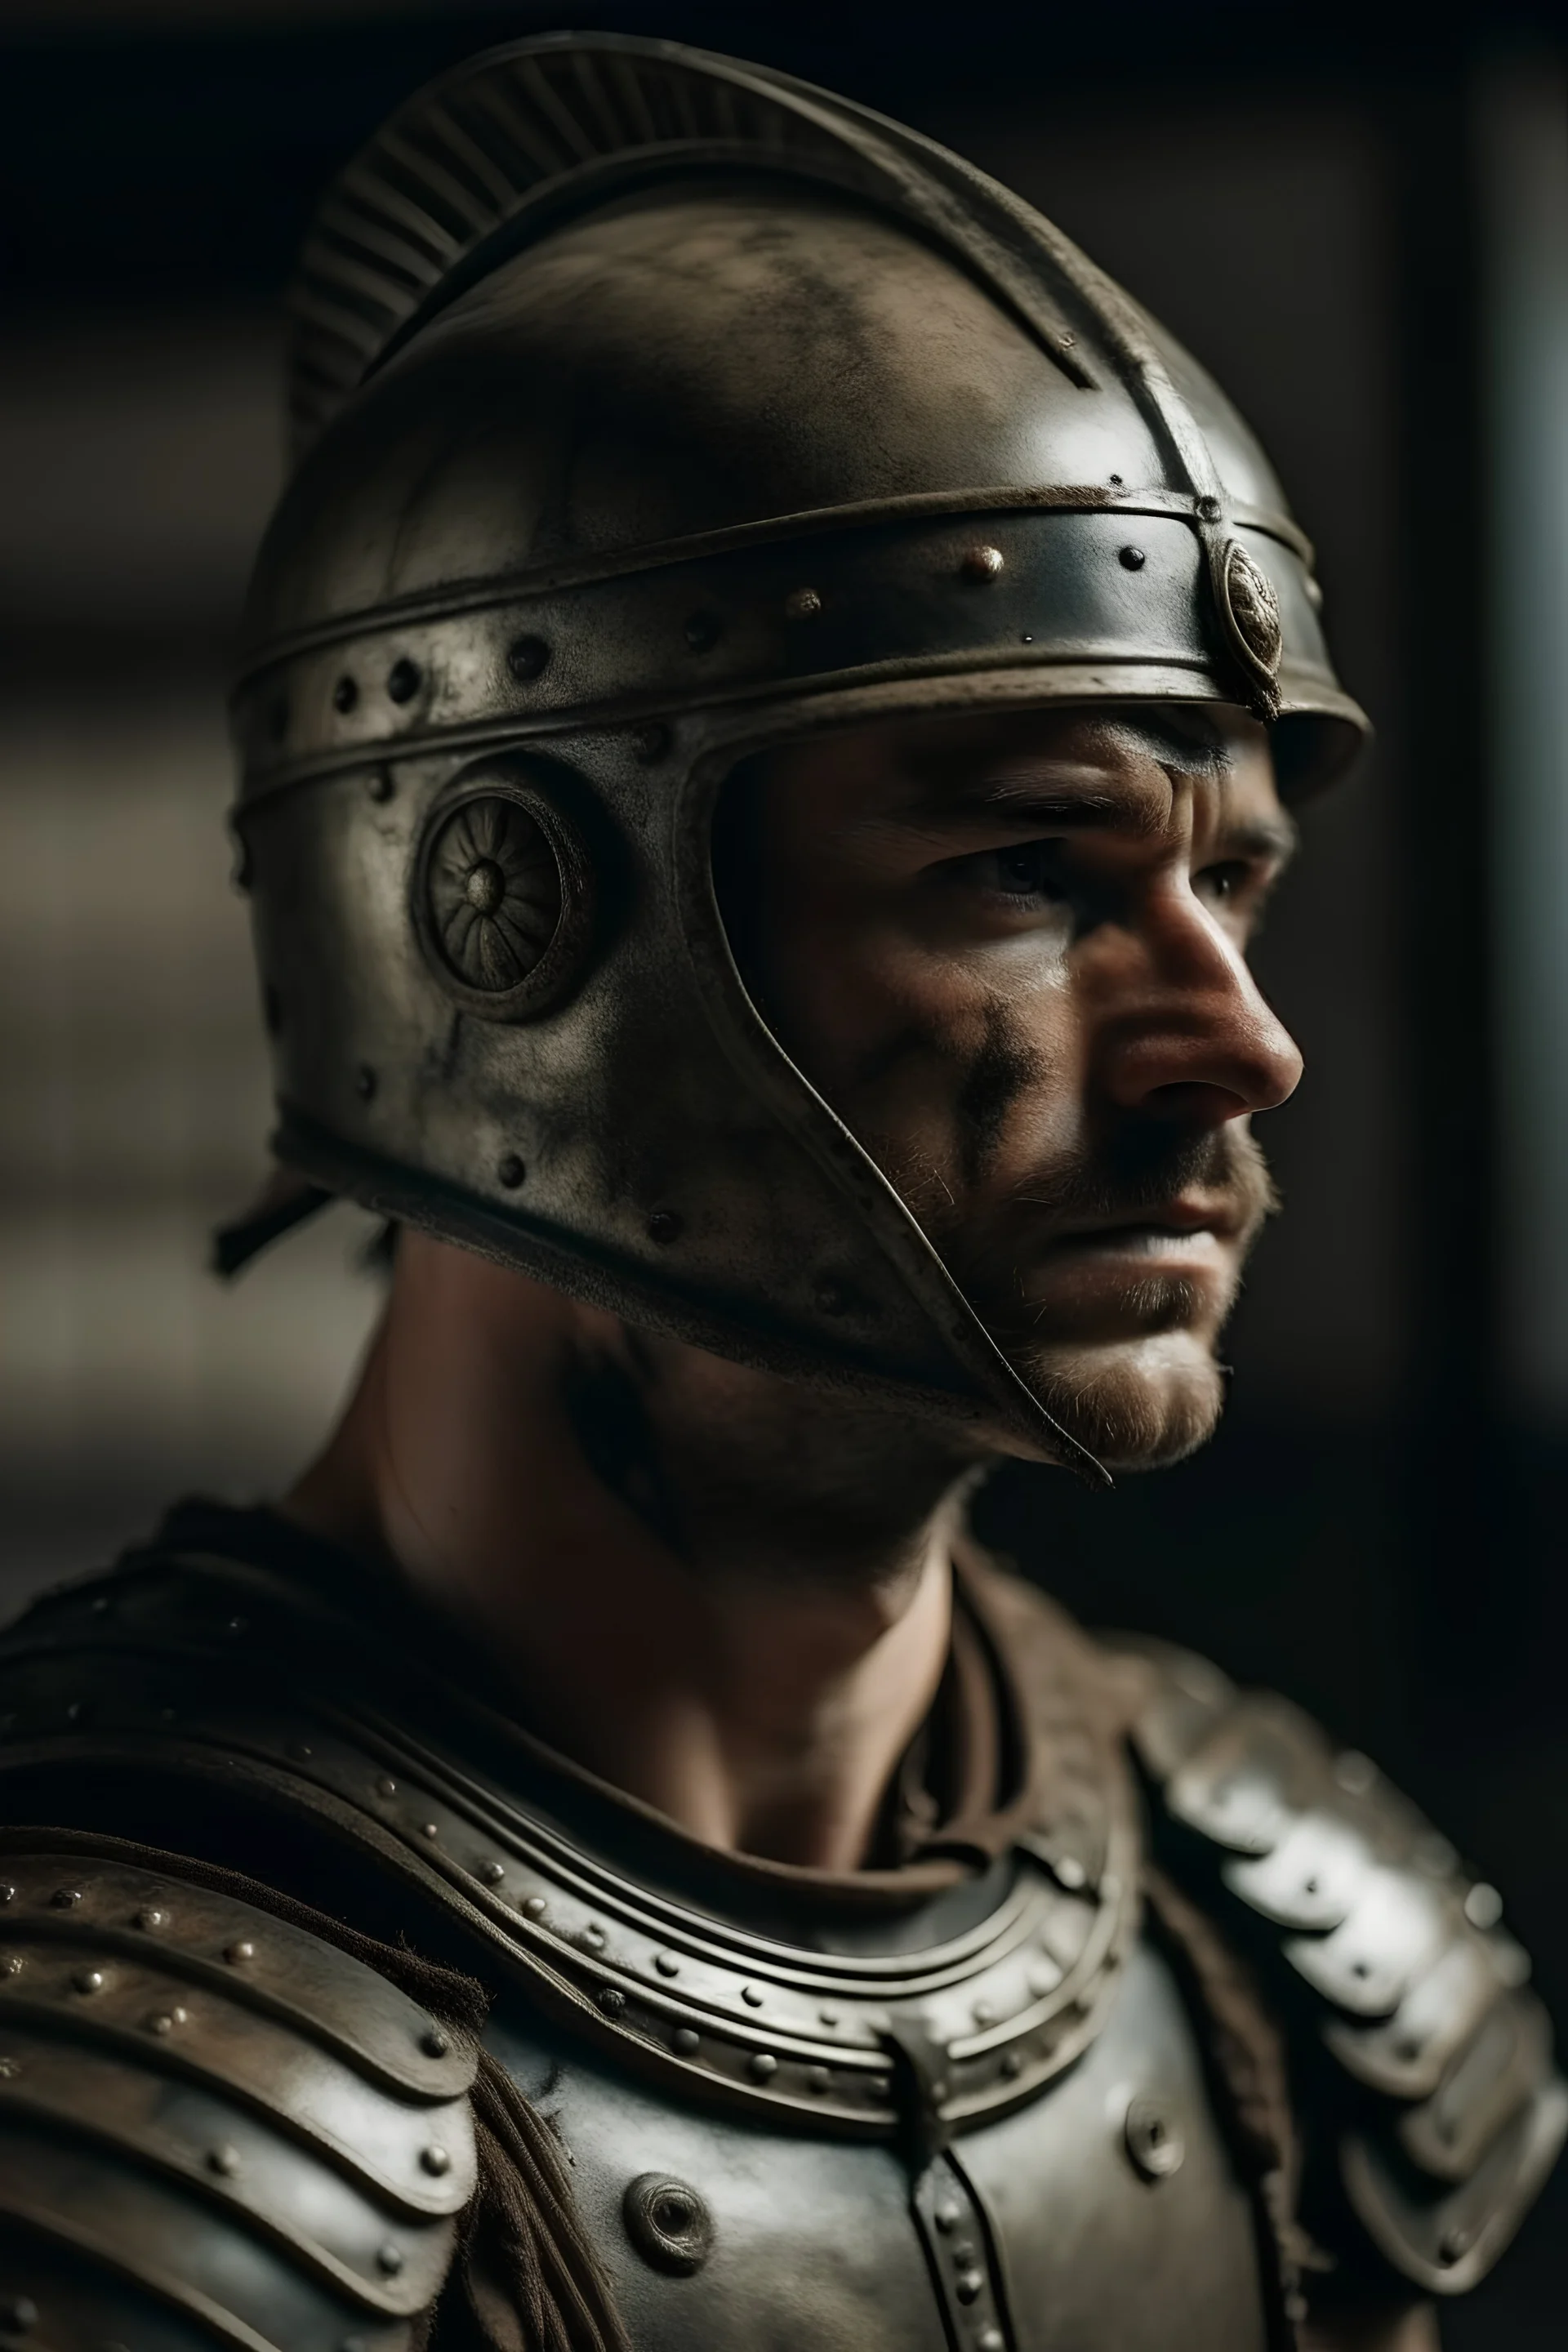 A portrait of a gladiator in the modern world wearing the gladiator helmet and suit